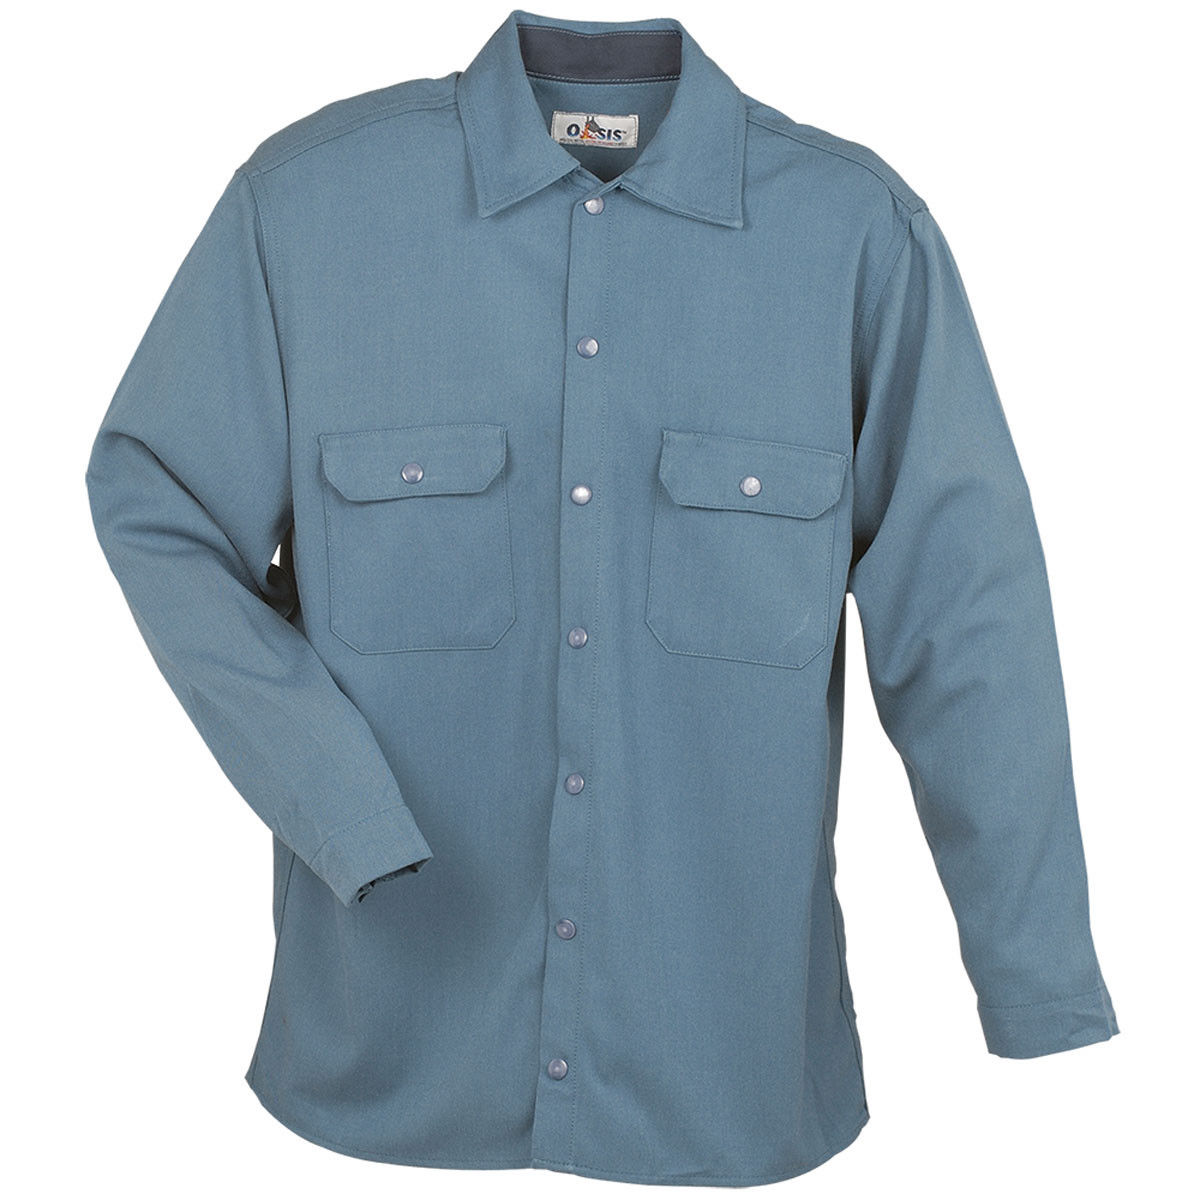 What type of pockets do these work shirts have?